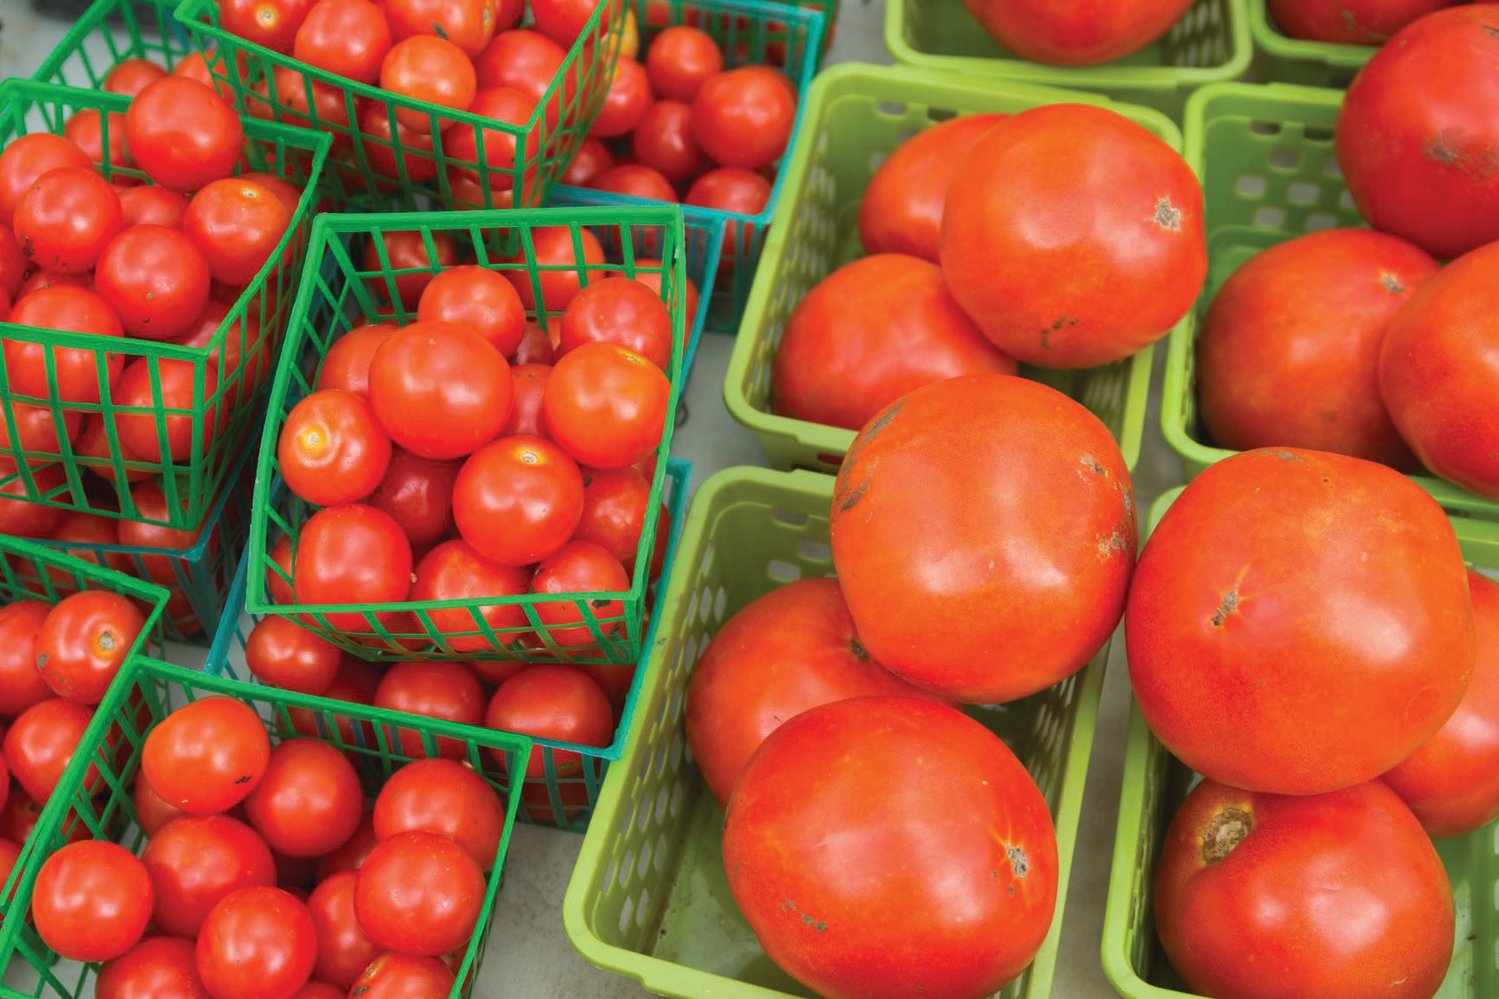 Heat brings out the antioxidants in tomatoes.